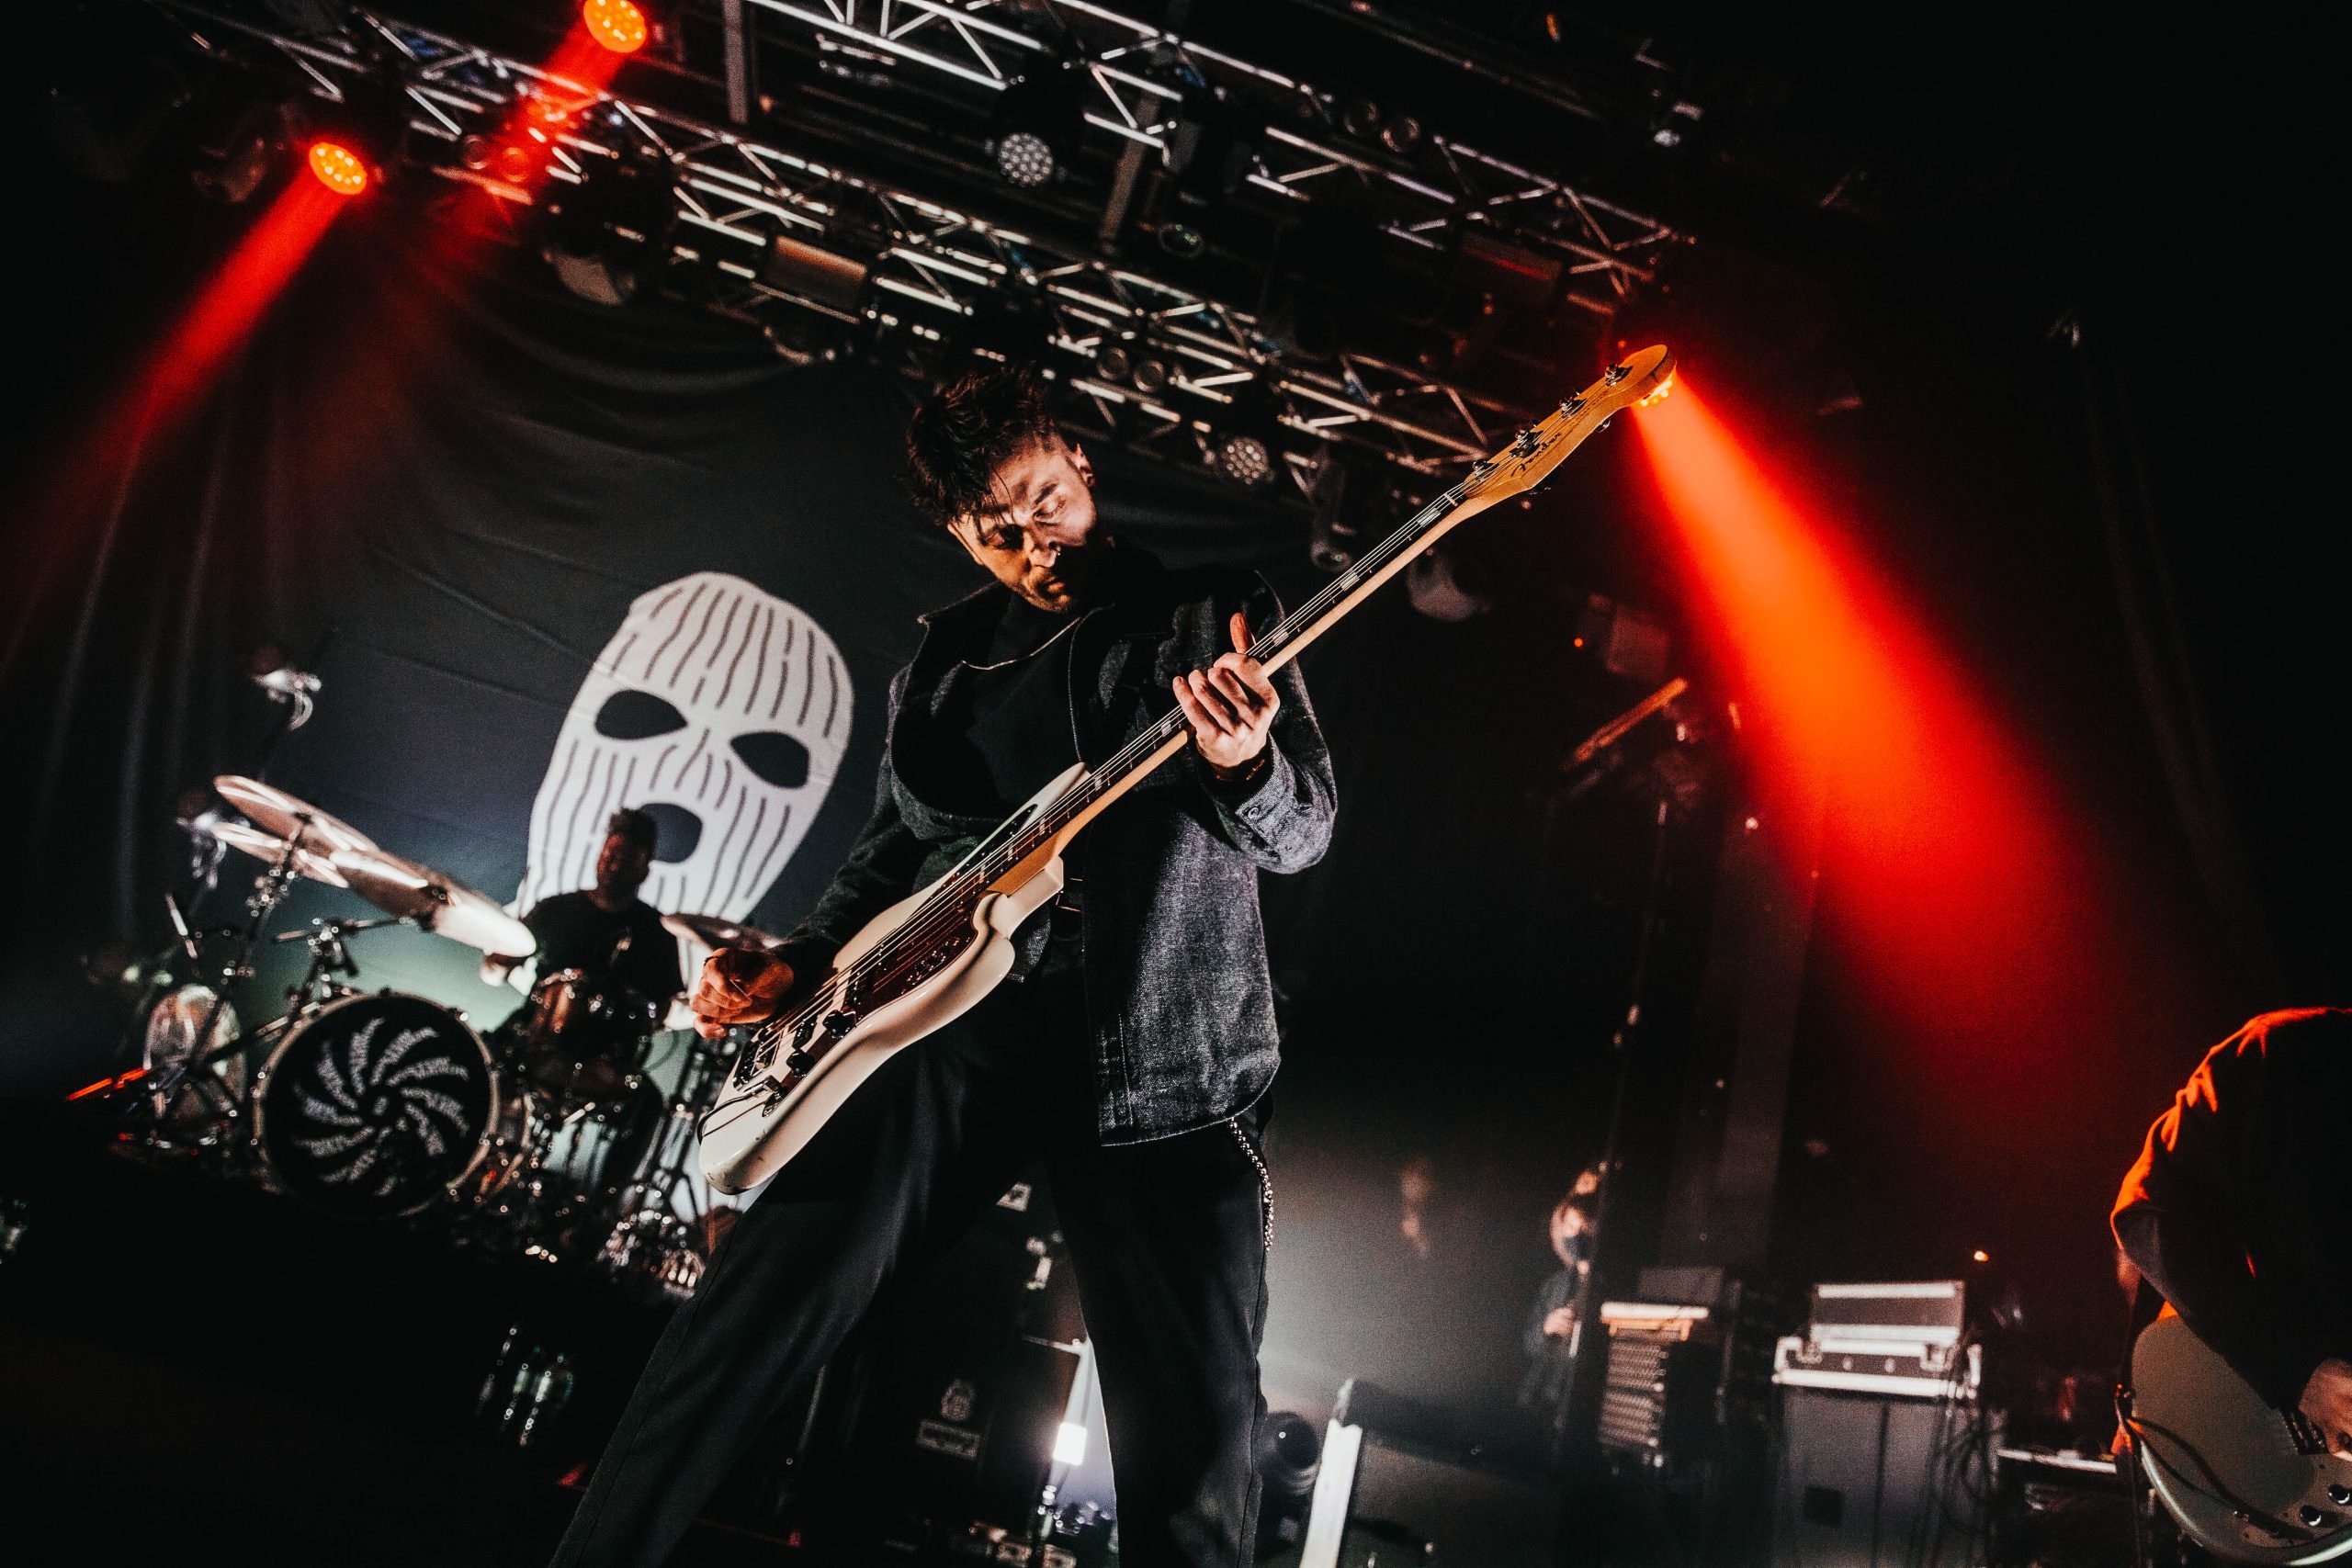 LIVE: Boston Manor @ Electric Brixton, London - All Things Loud 2560x1710